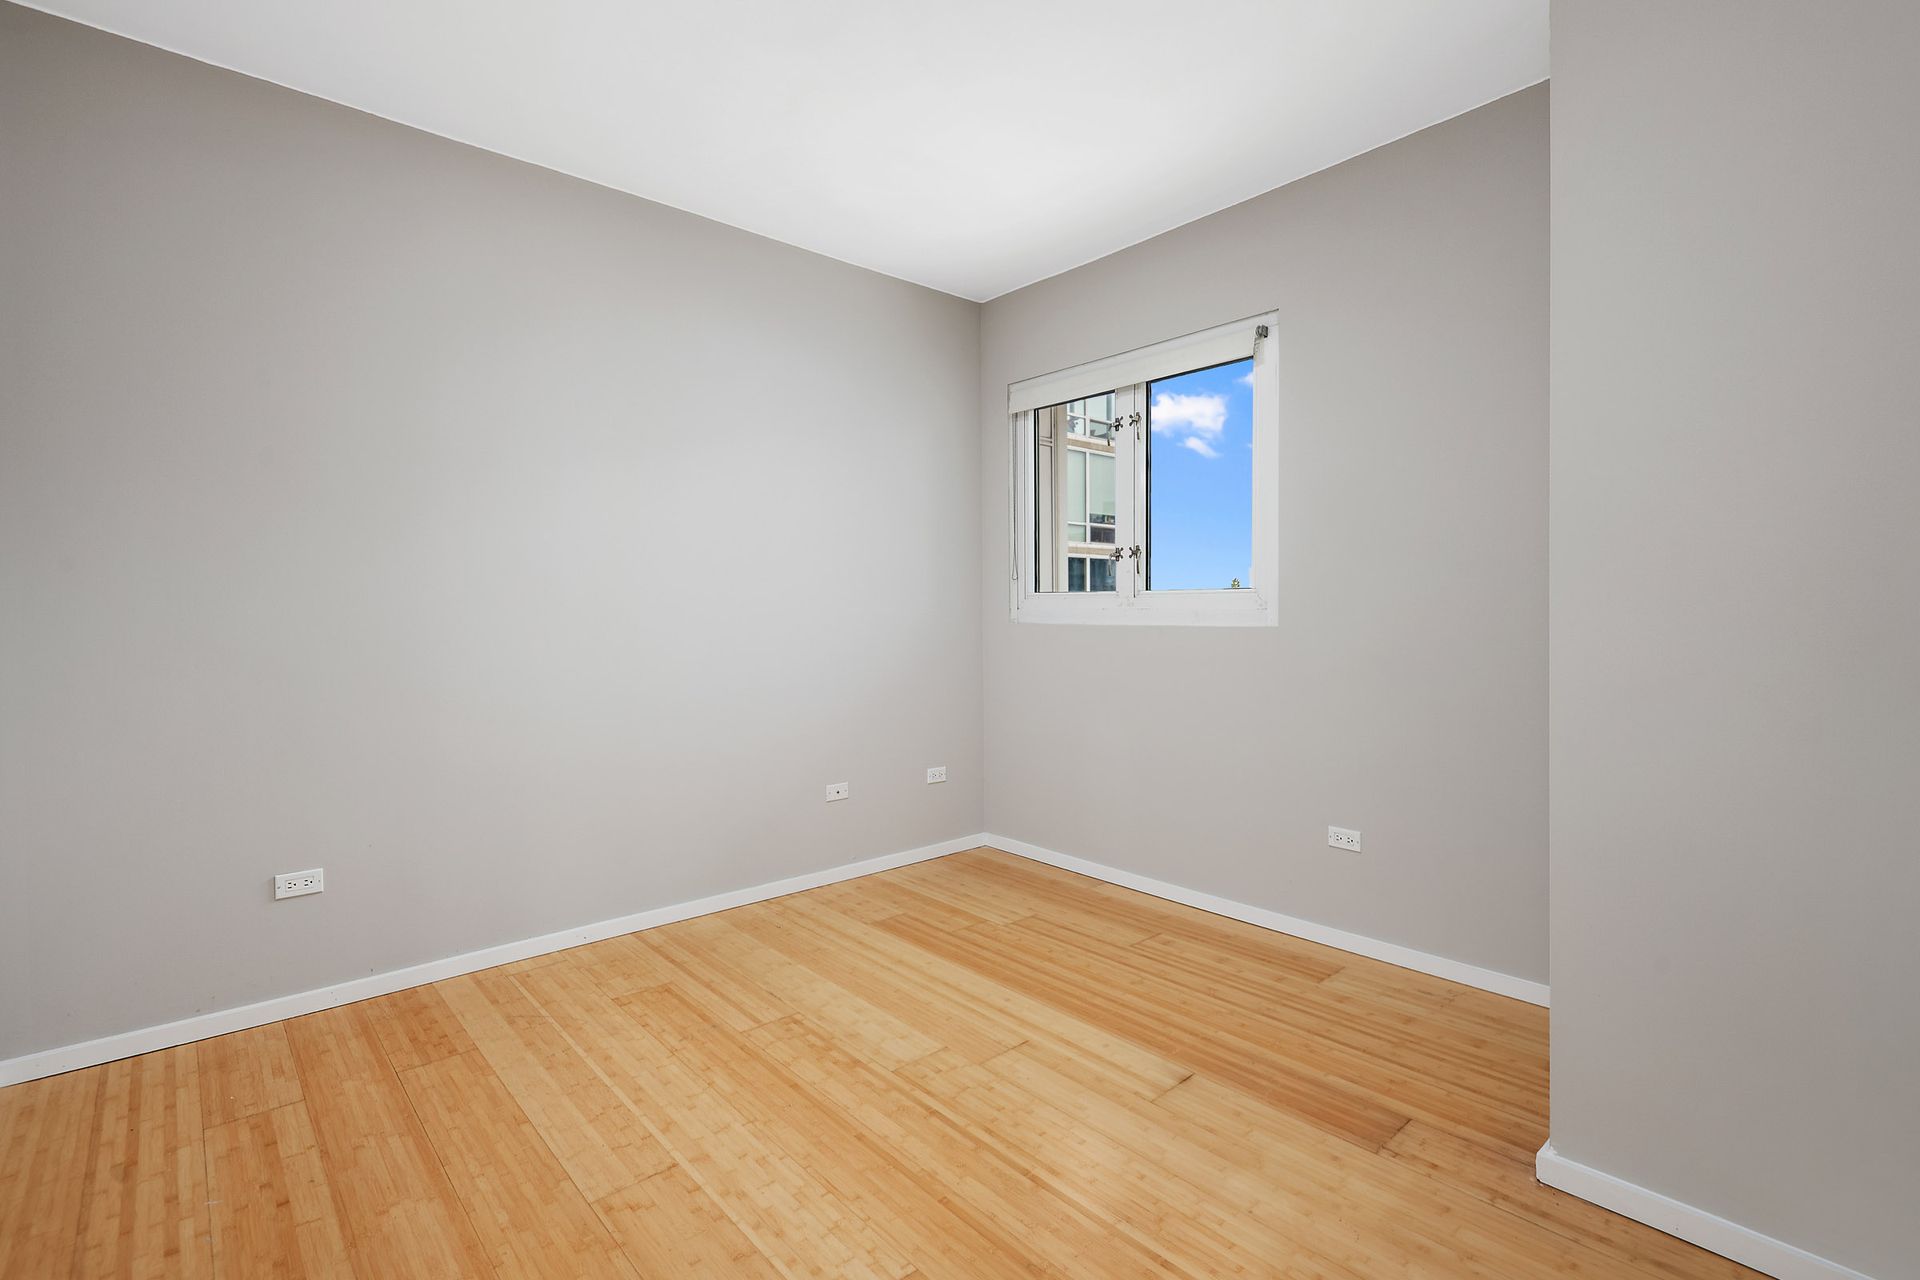 An empty room with hardwood floors and a window at 24 S Morgan Apartments.